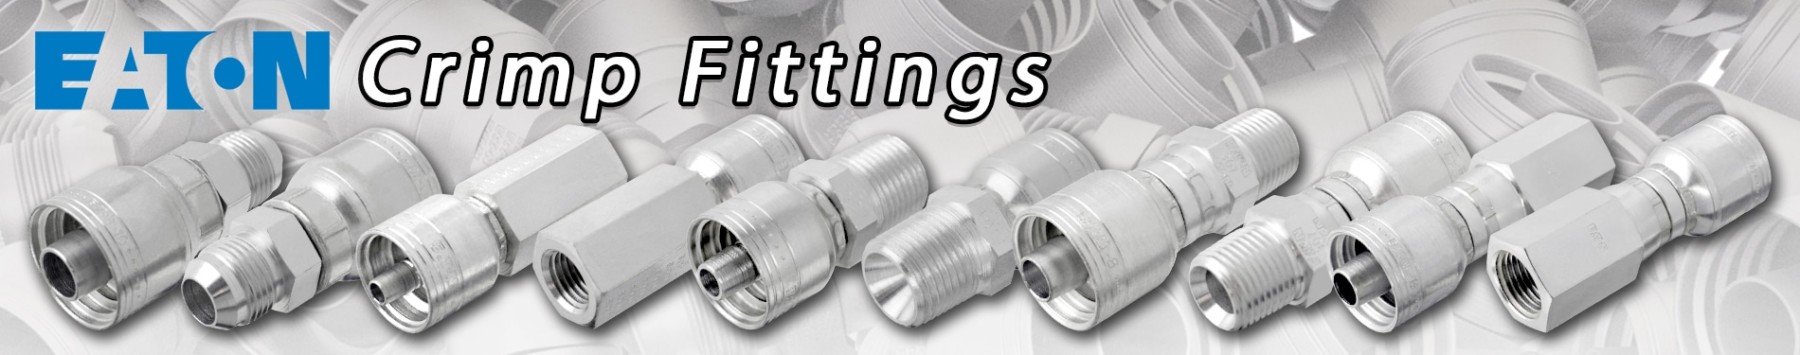 Compilation of Eaton Crimp Fittings